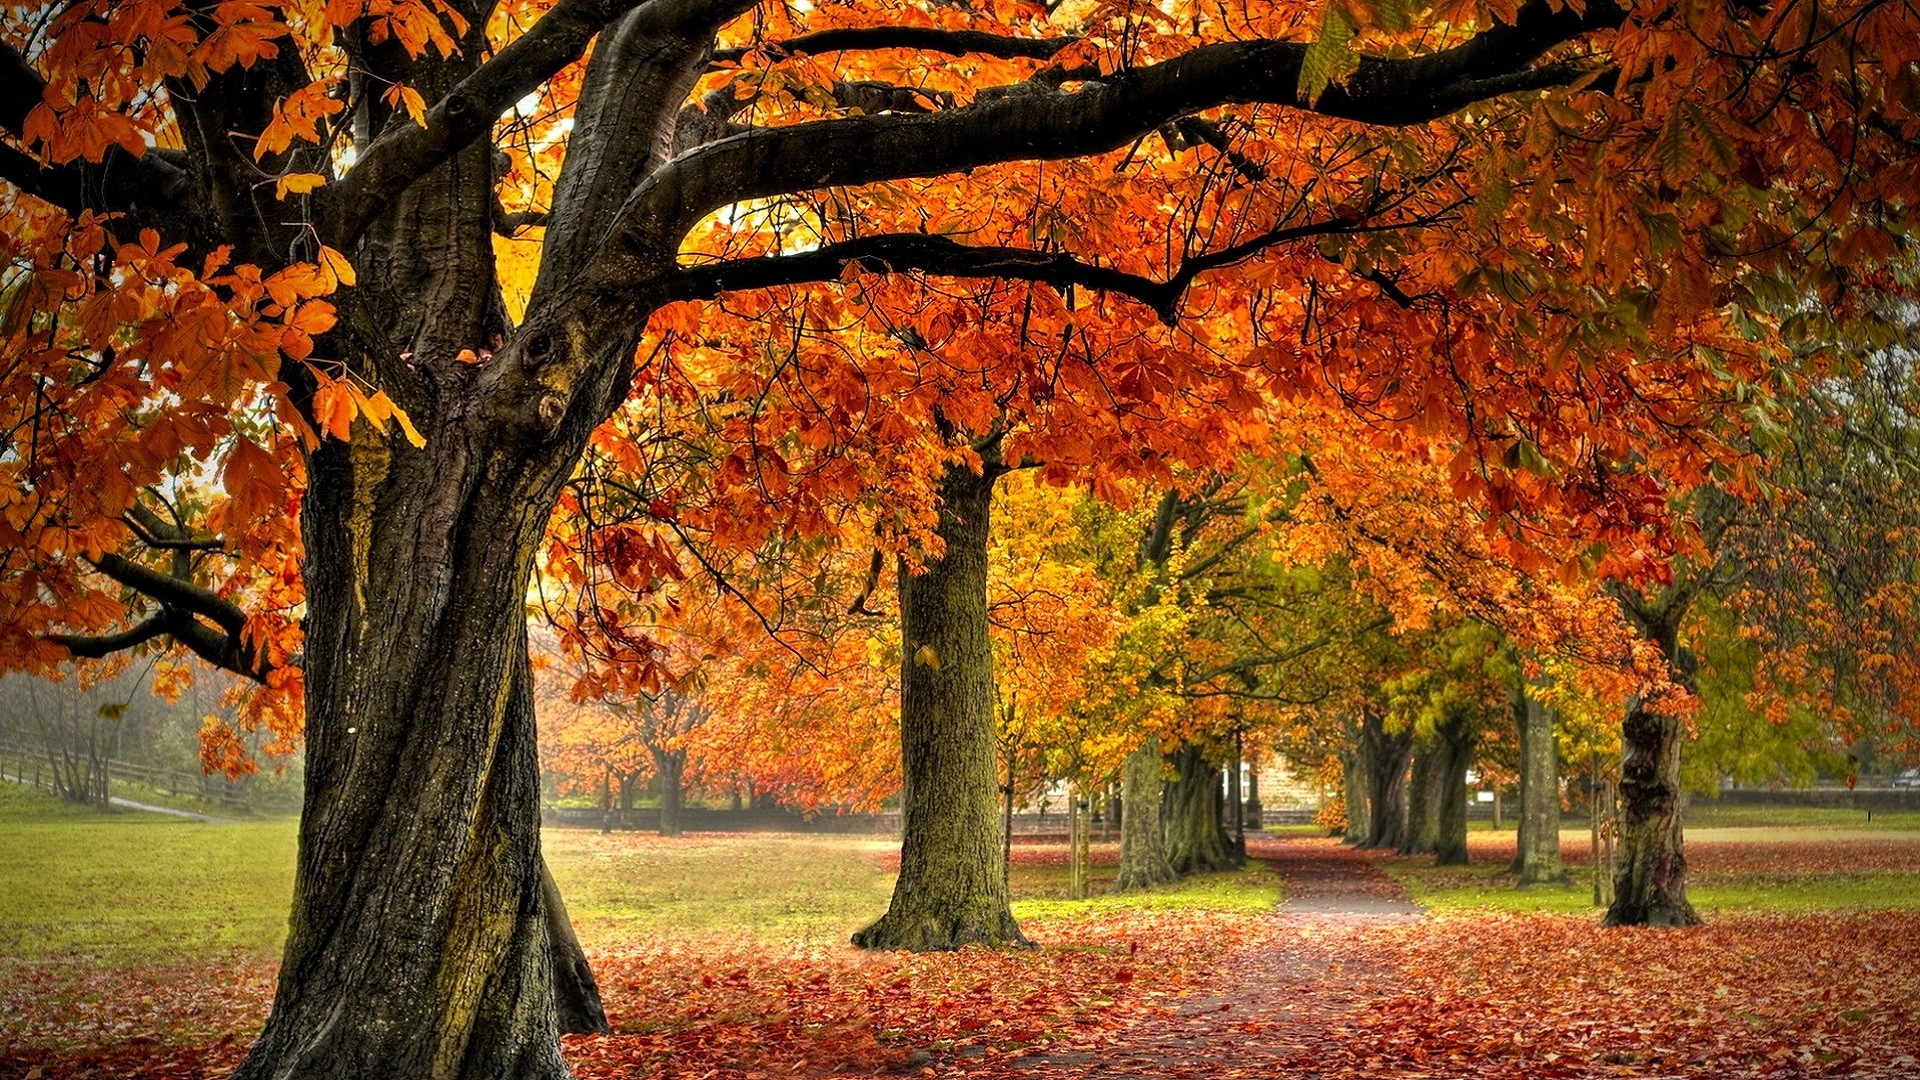 1920x1080 ...  37 Desktop Images of Autumn Forest Autumn Forest Wallpapers